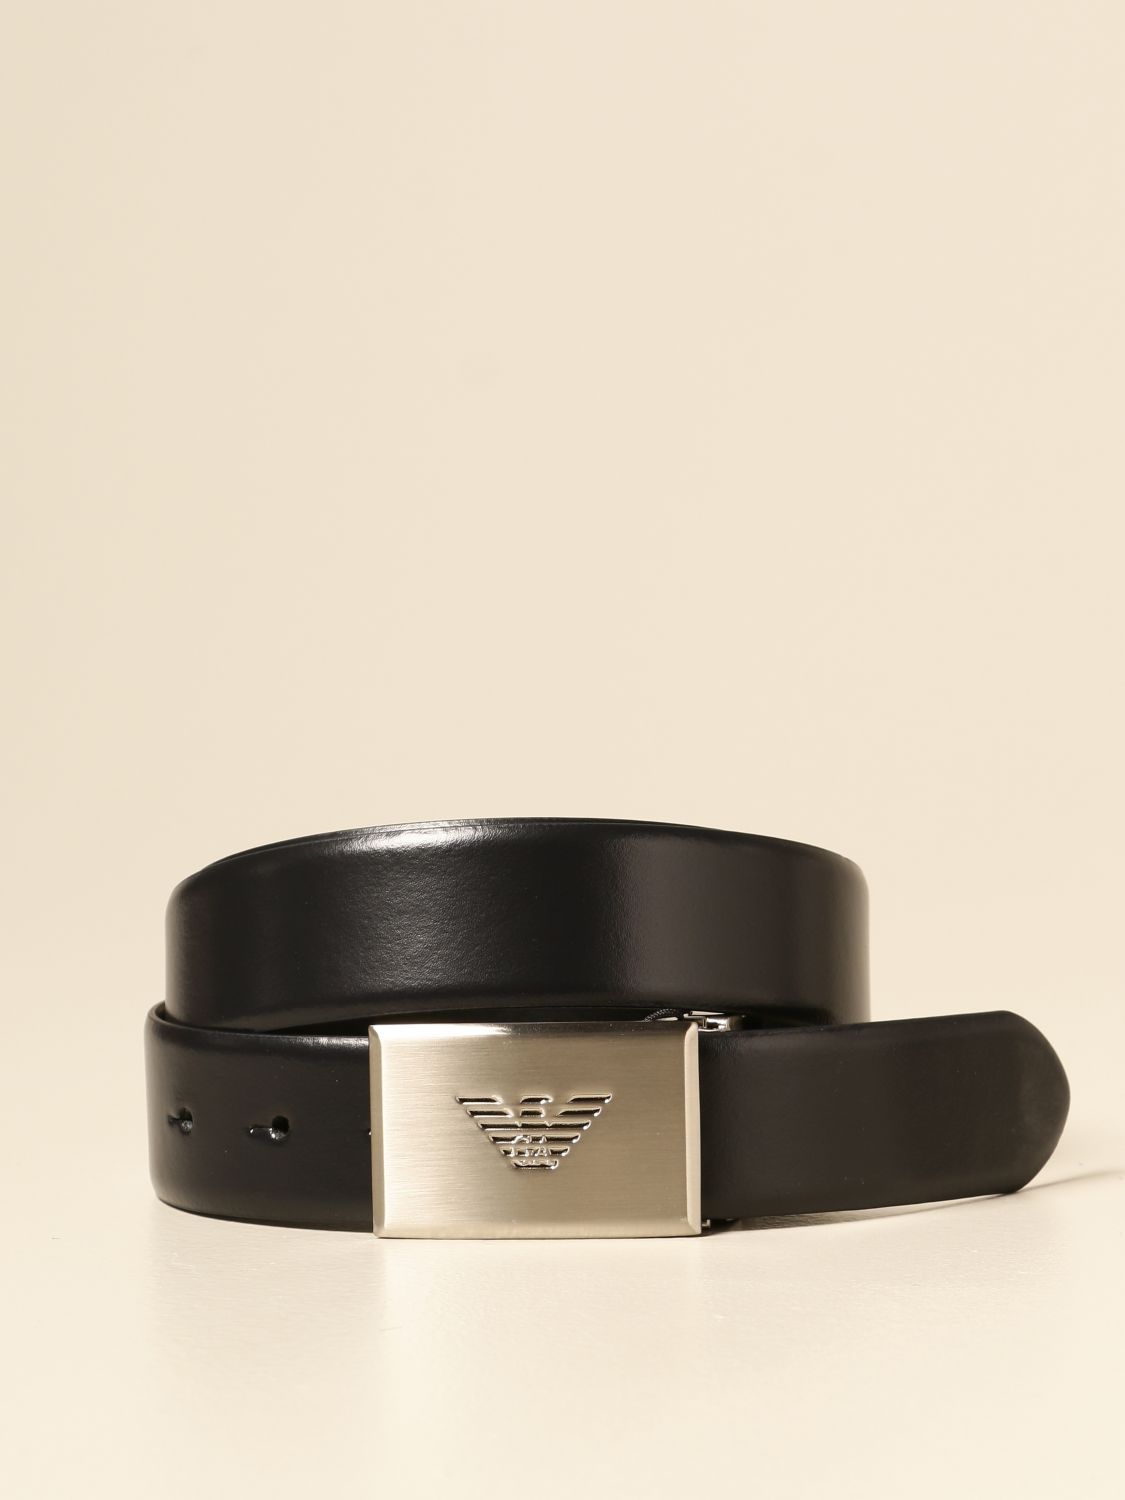 EMPORIO ARMANI: Reversible belt in two-tone smooth calfskin | Belt ...